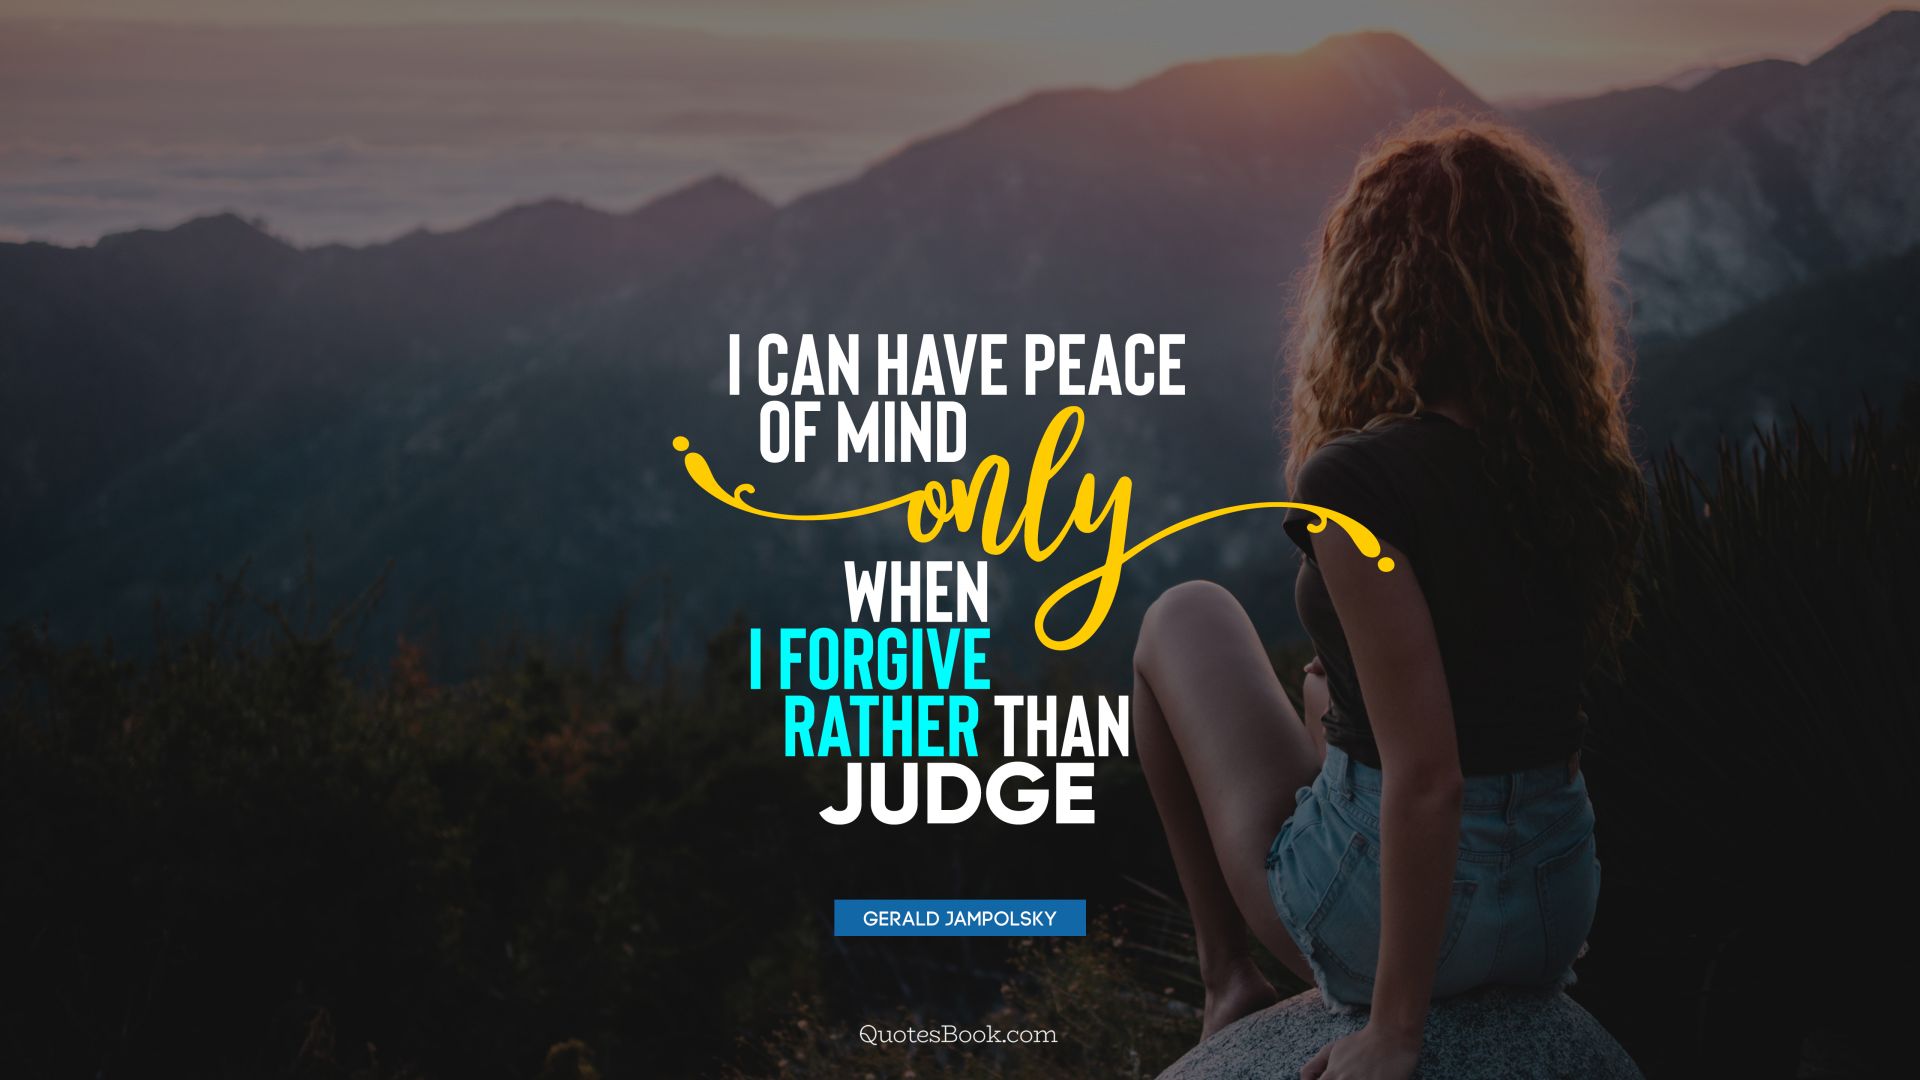 I can have peace of mind only when I forgive rather than judge. - Quote by Gerald Jampolsky